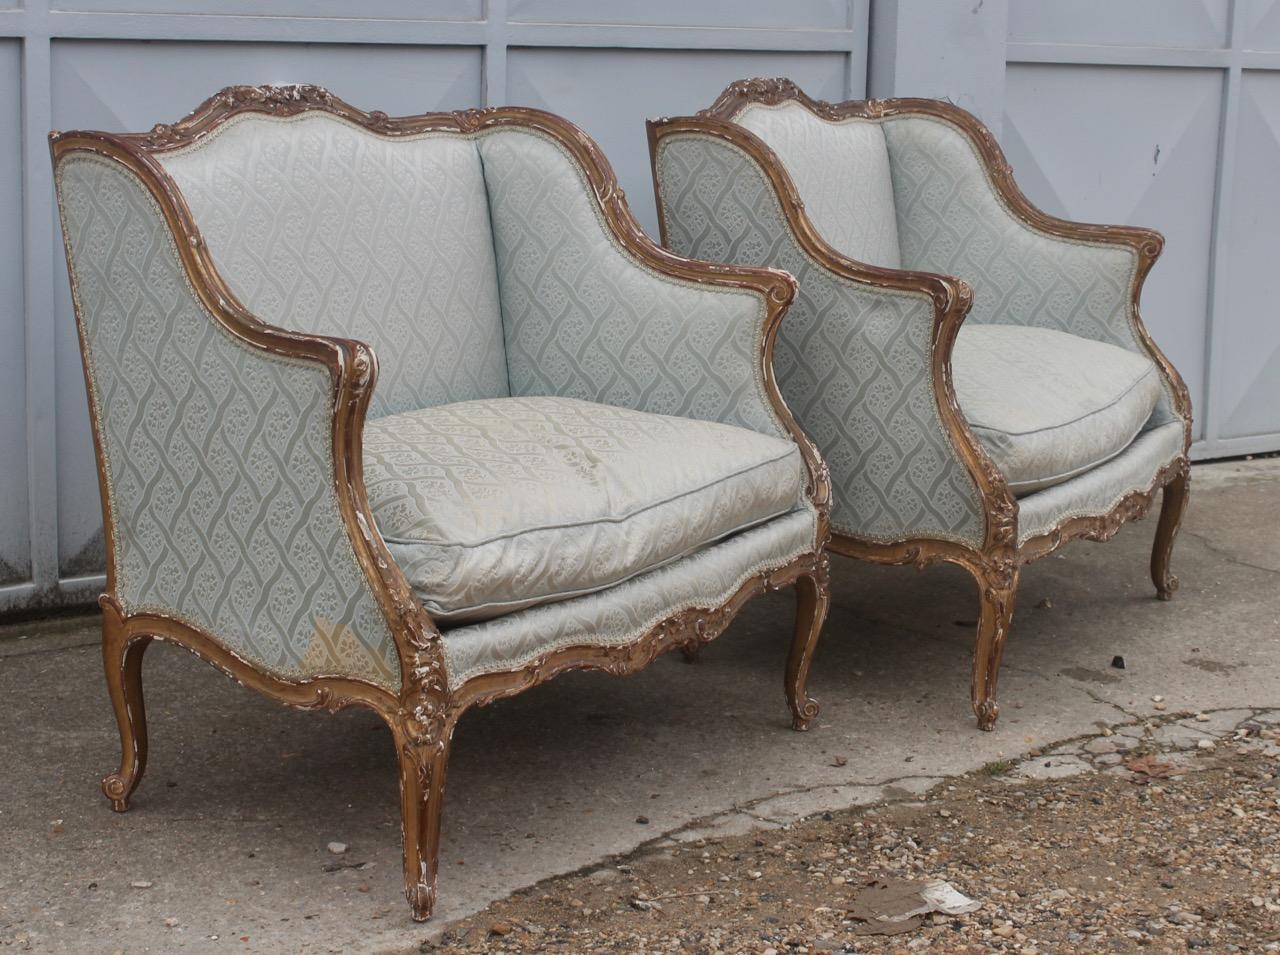 A pair of 19th century Louis XV style molded, carved and giltwood marquises
after an 18th century model by Jean-Baptiste Tilliard,
circa 1880
Provenance: Chateau des Boulay, France.